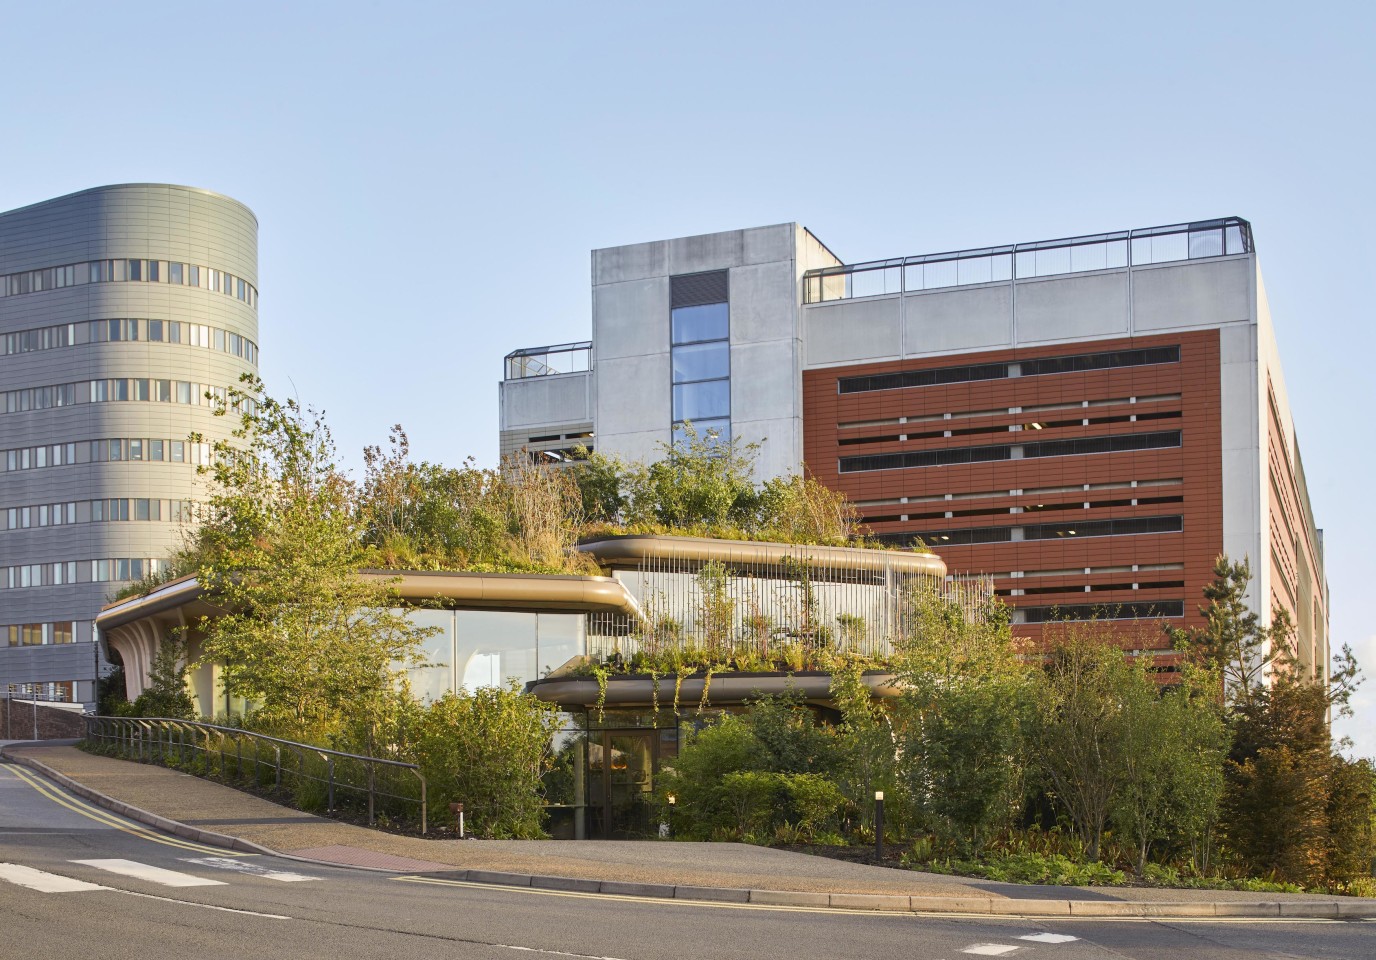 Maggie's Leeds is located in St. James’s University Hospital in Leeds, England, on an awkward sloping site that posed construction challenges